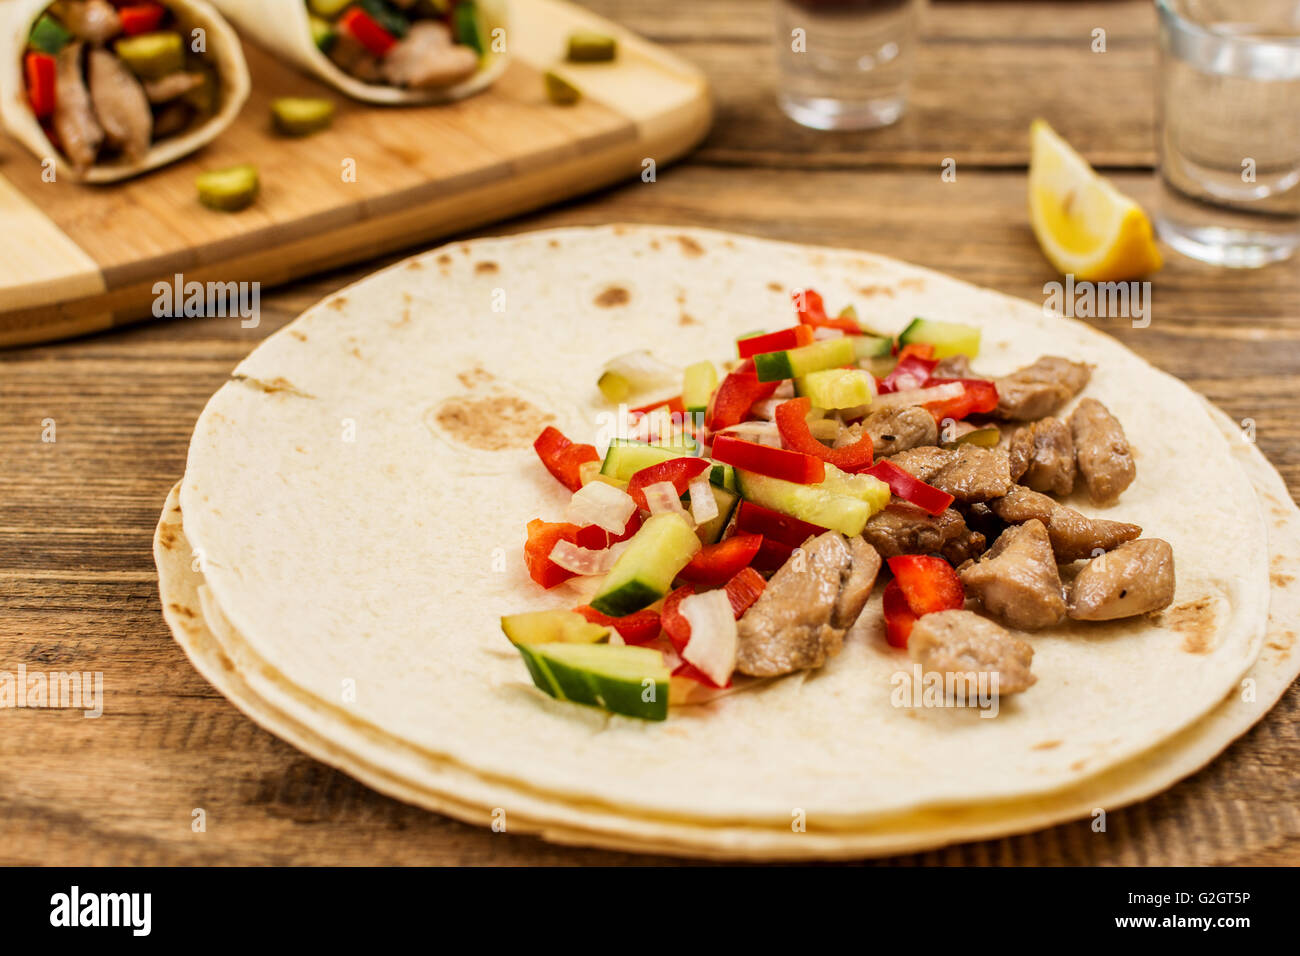 Traditional mexican tortila wrap with meat and vegetables Stock Photo